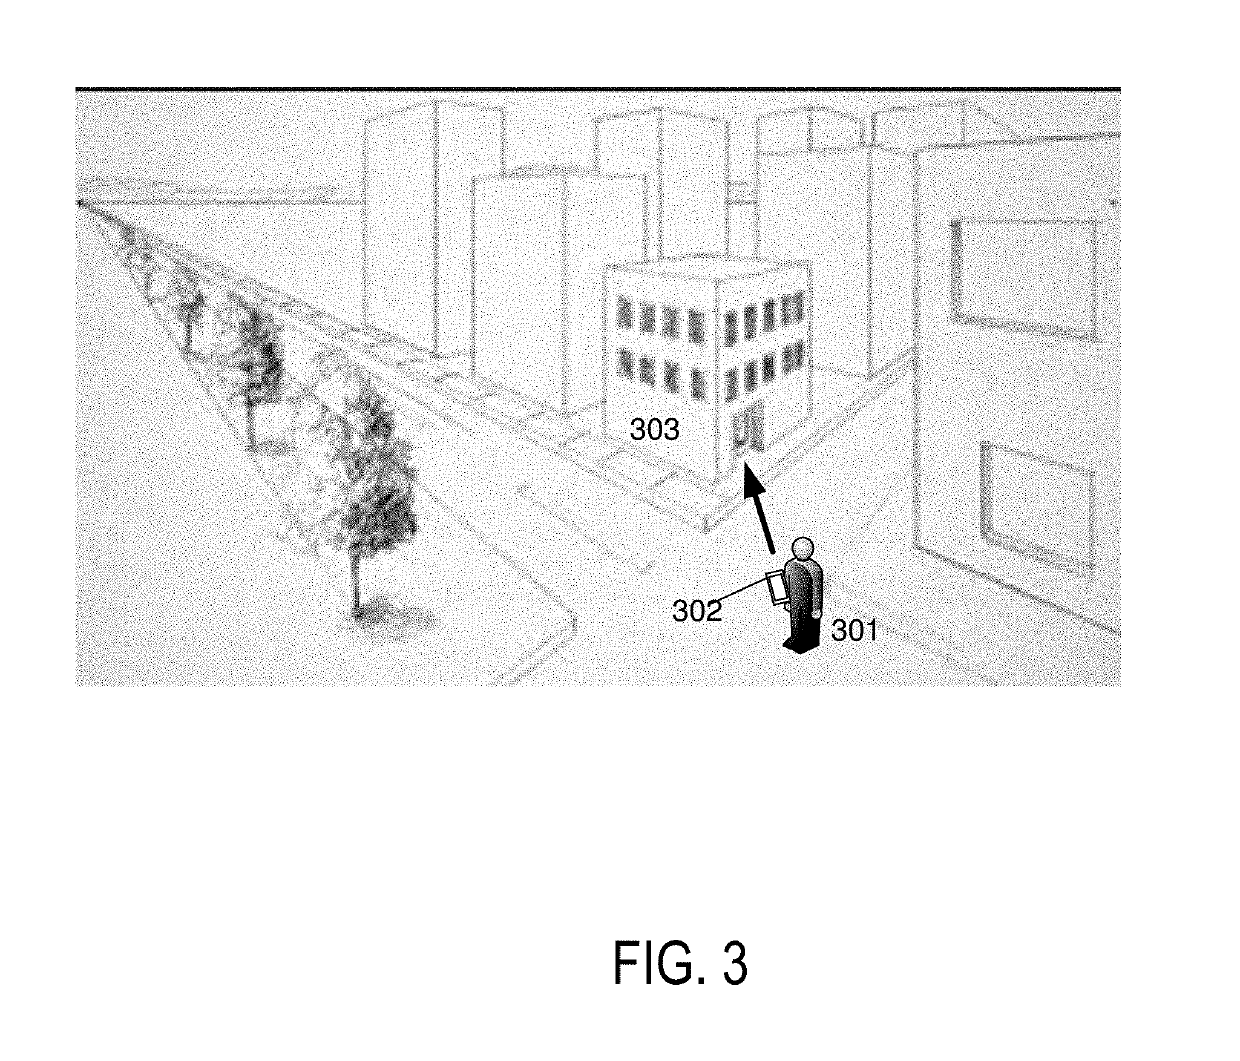 Drive-thru / point-of-sale automated transaction technologies and apparatus